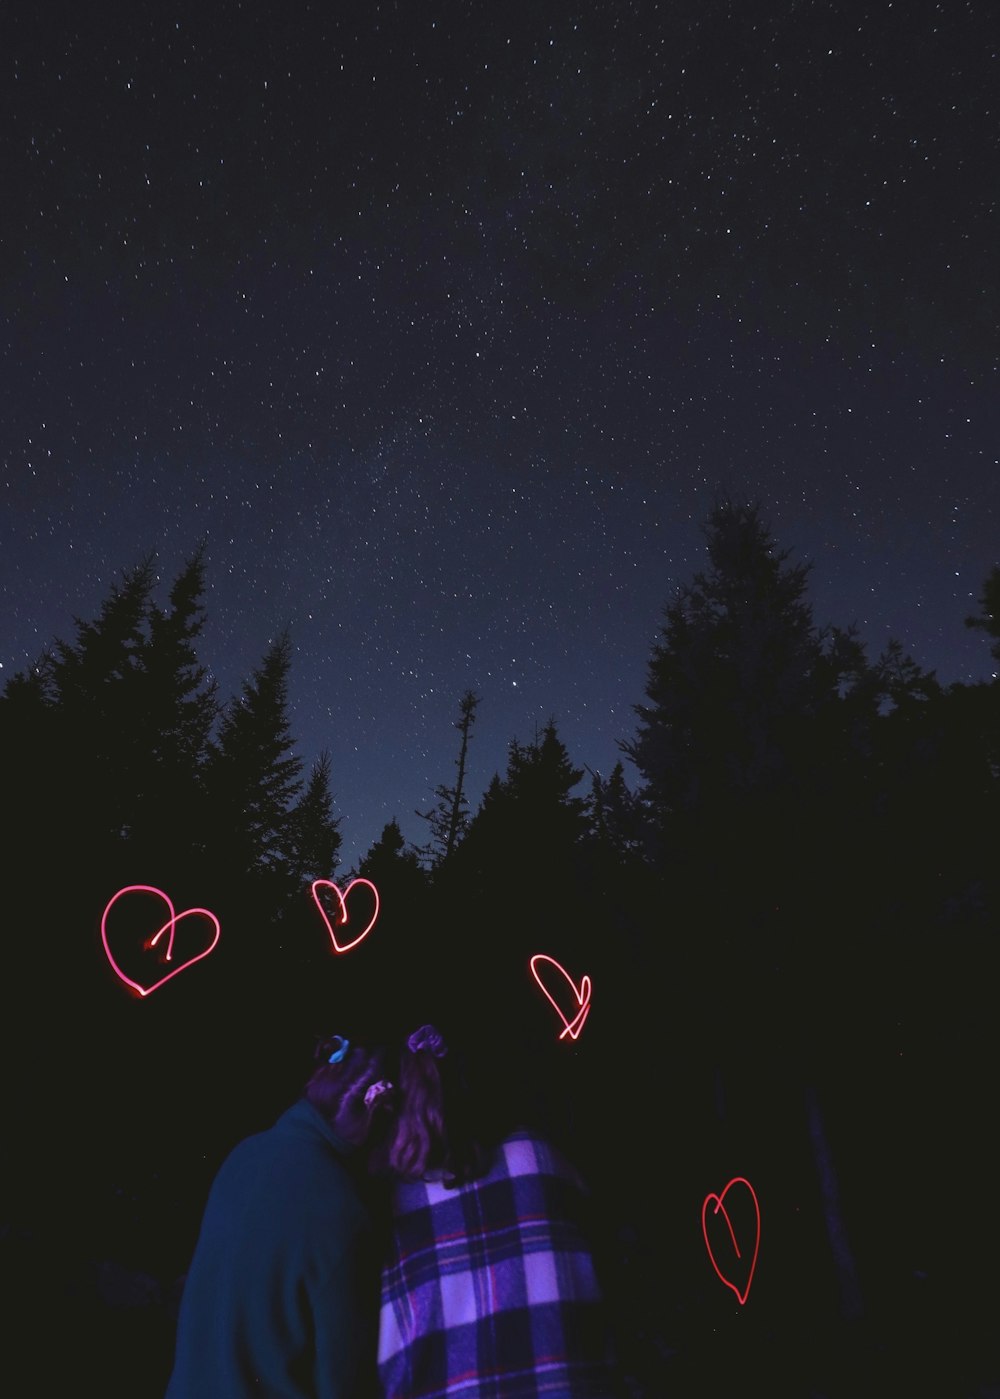 two people standing in the dark with hearts drawn on them